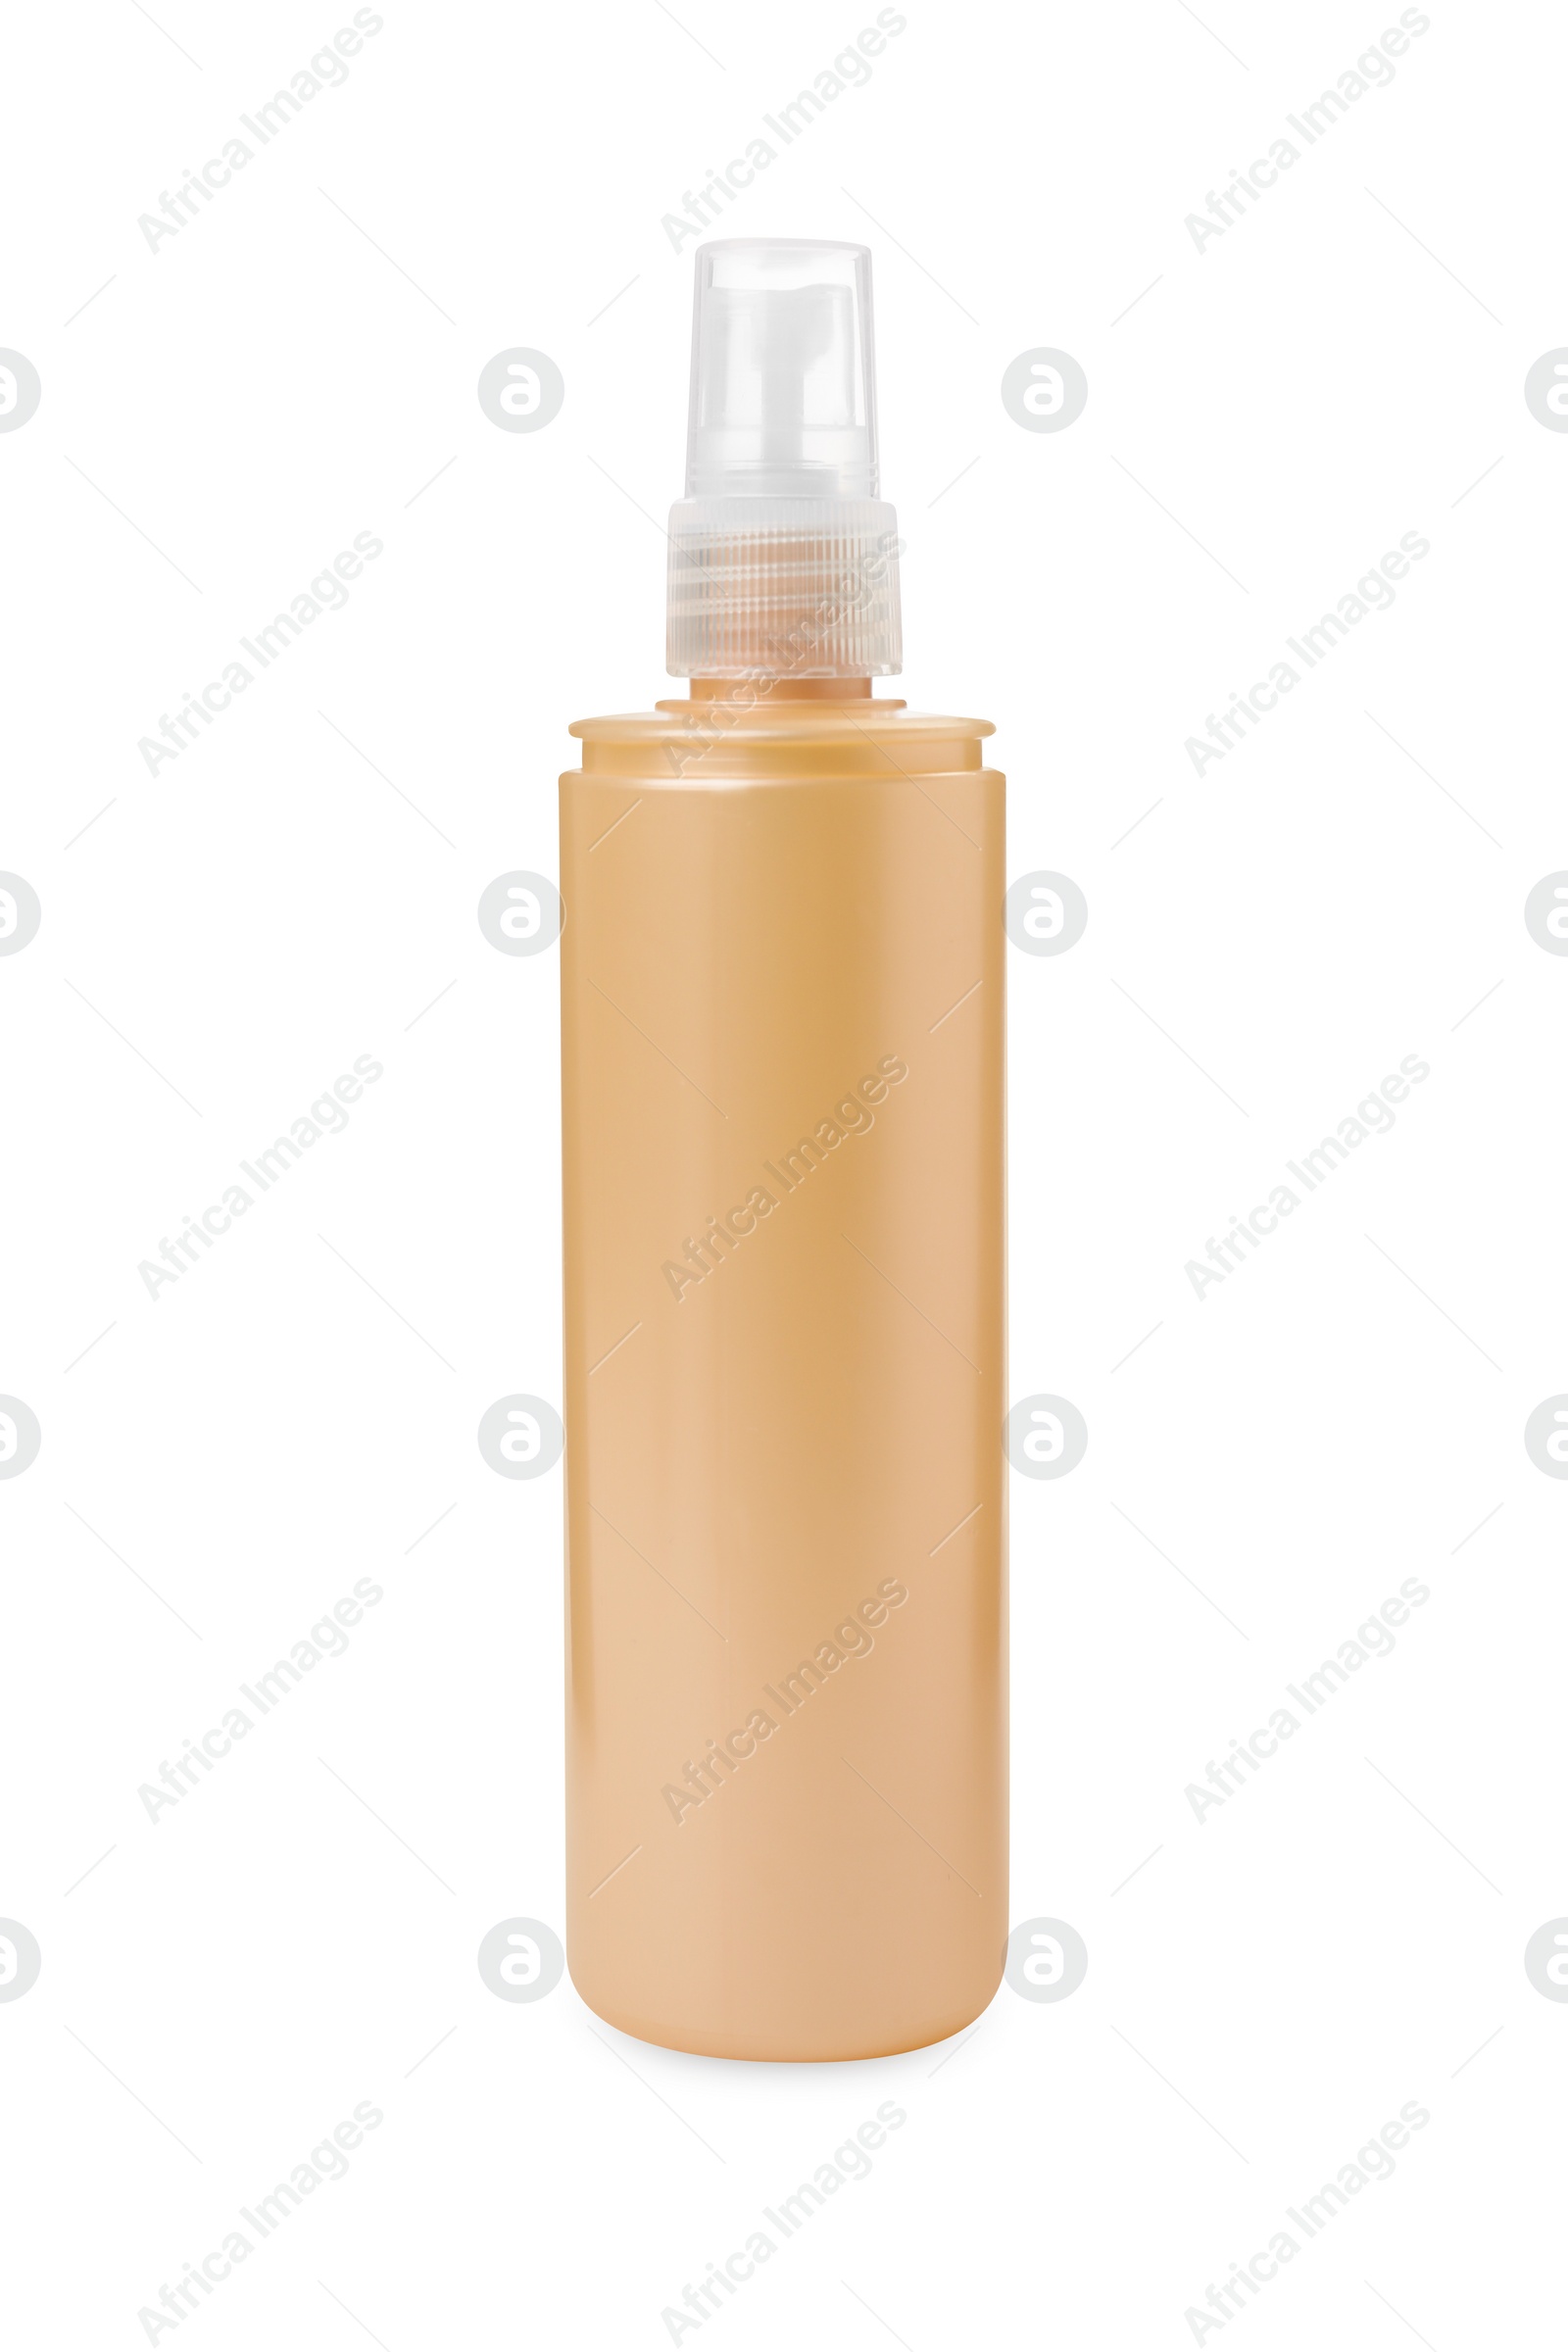 Photo of Spray bottle with hair thermal protection isolated on white